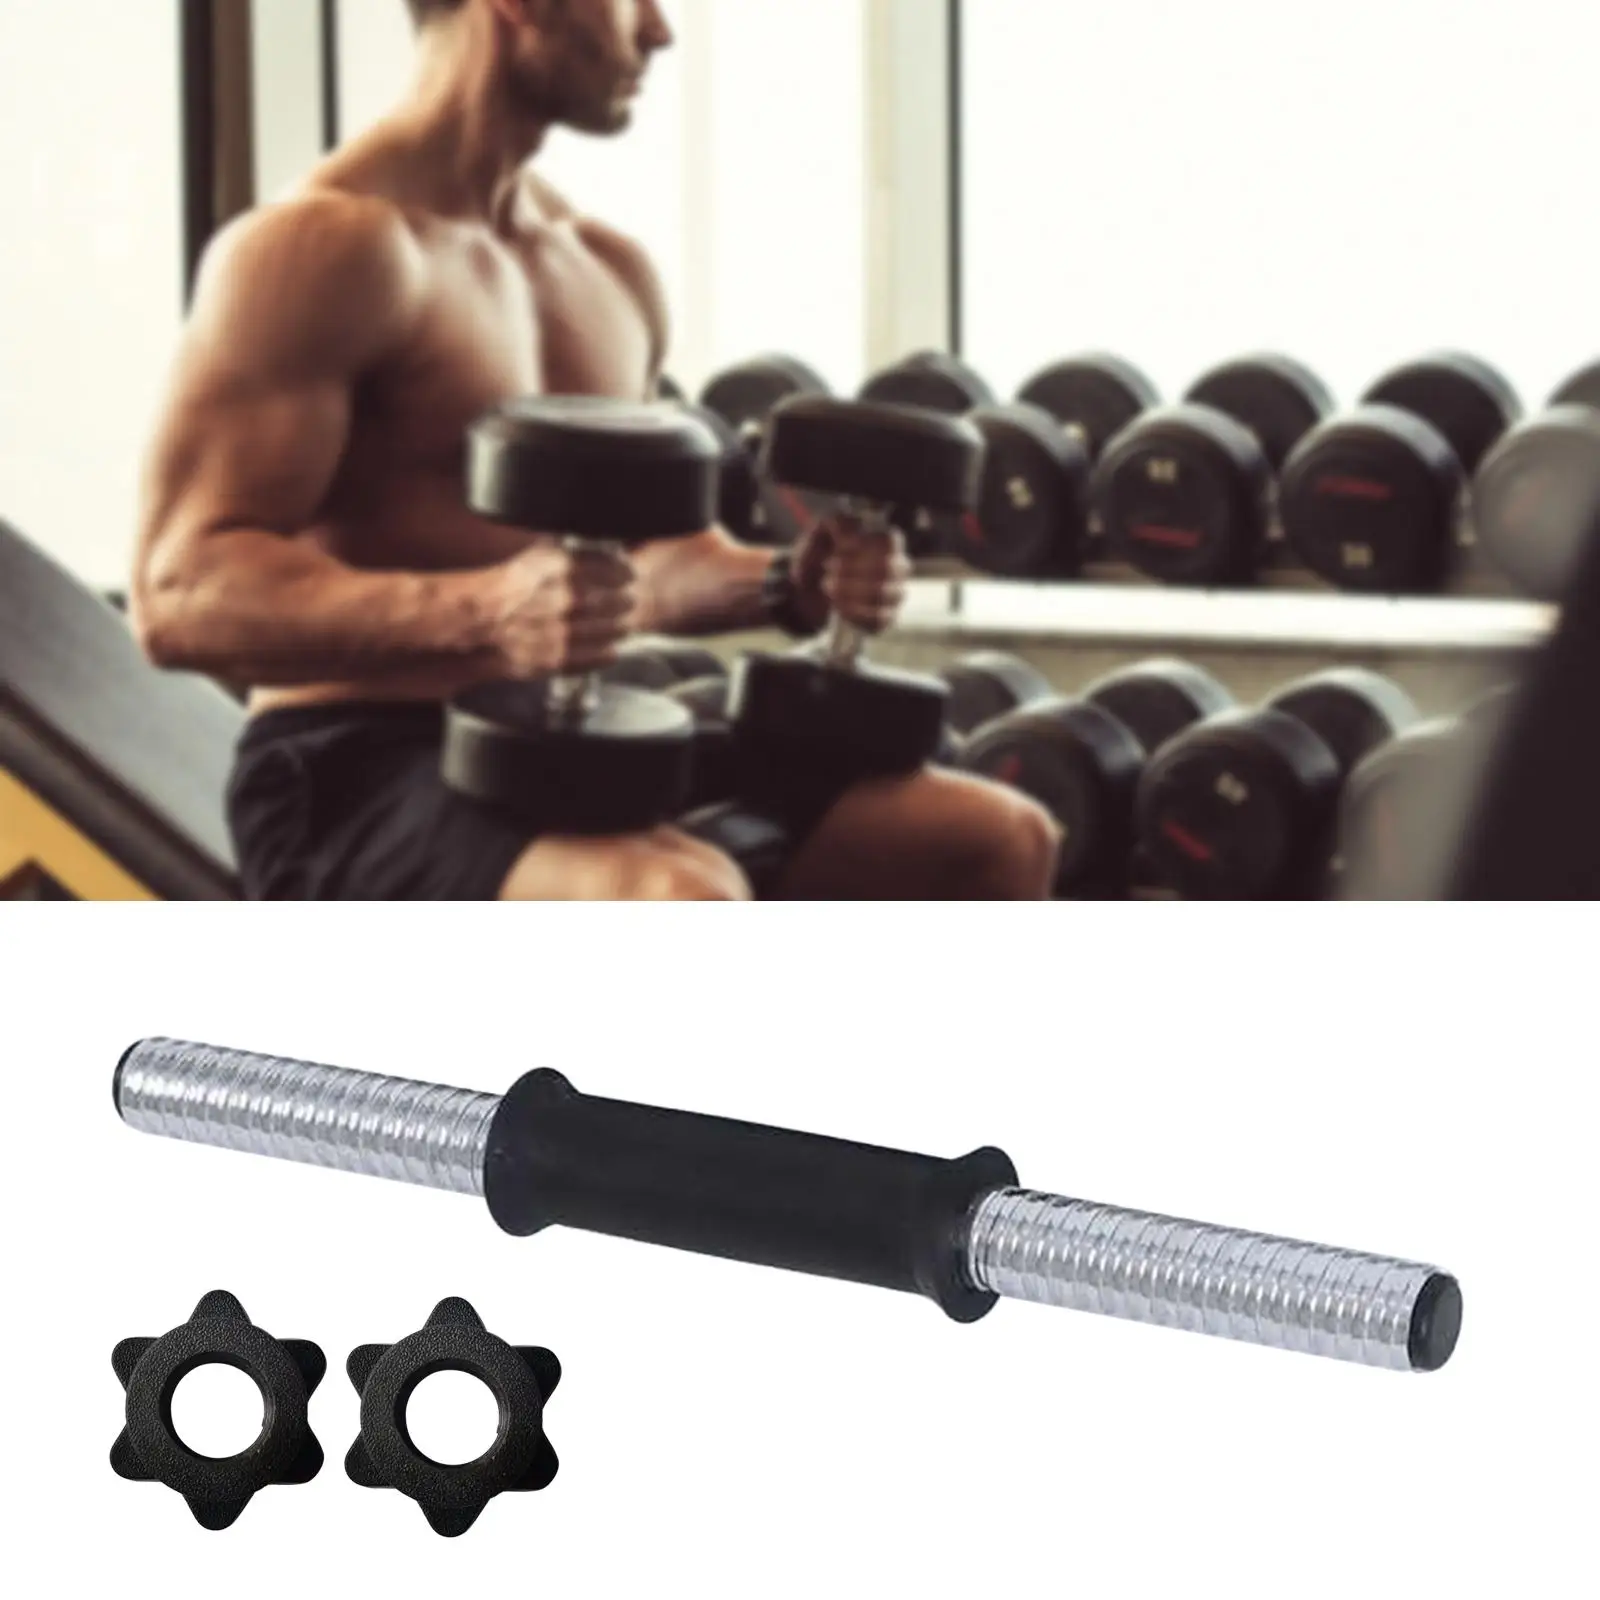 Dumbbell Bar Dumbbell Connecting Rod Fitness Attachment Nonslip Handle Bodybuilding for Muscle Building Weightlifting Workout